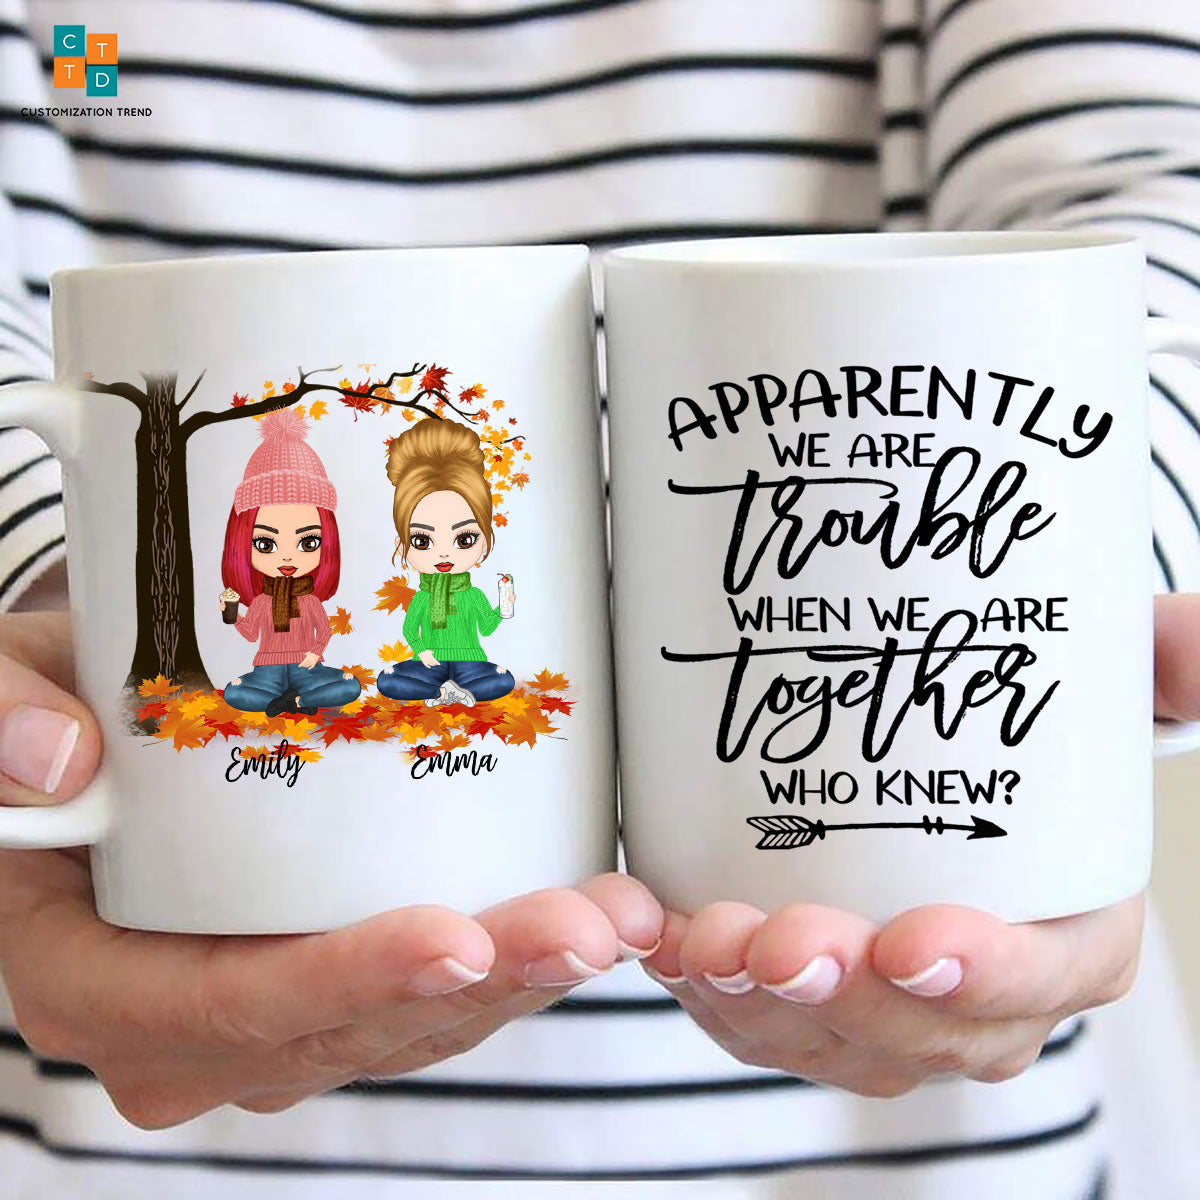 Personalized  Chance Made Us Colleaugues But The Fun & Laugher We Share Made Us  Mug , Custom Friend , Bestie , Sister Mug